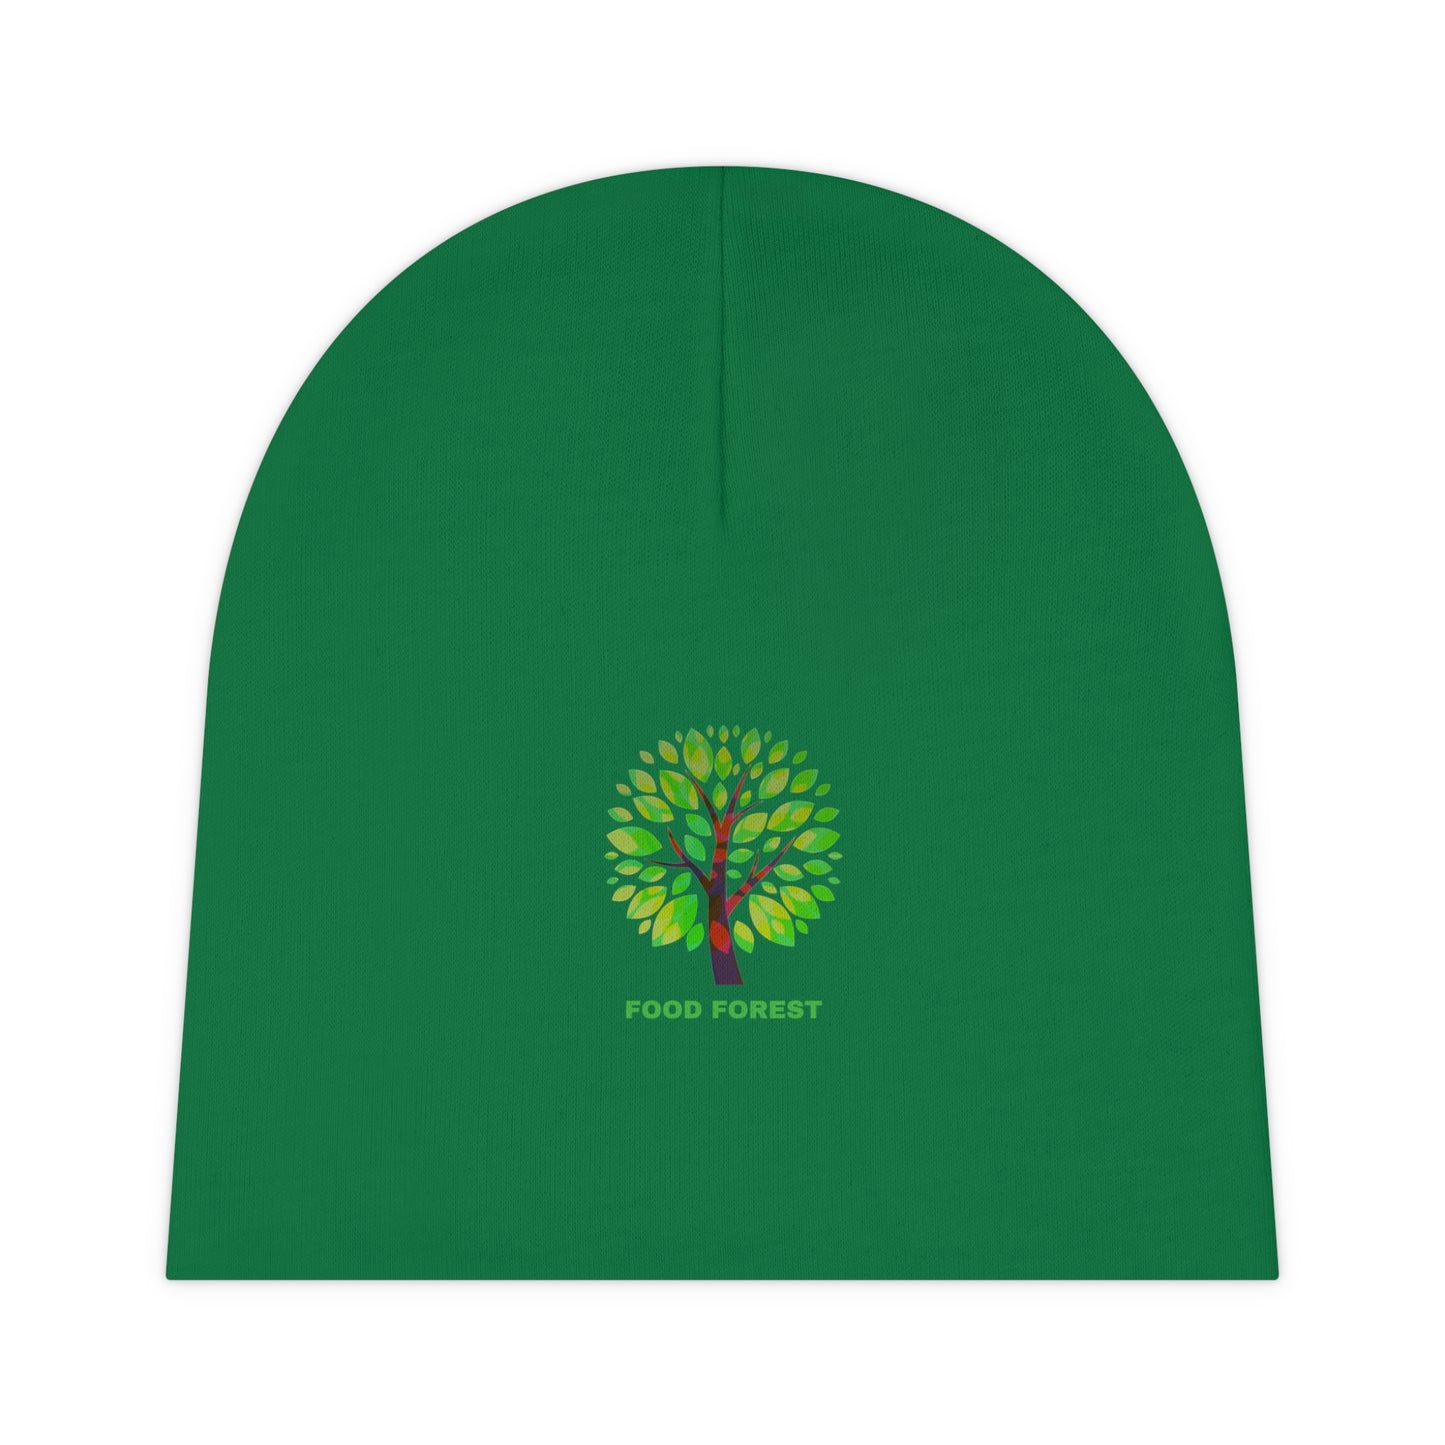 FOOD FOREST Baby Beanie, Green